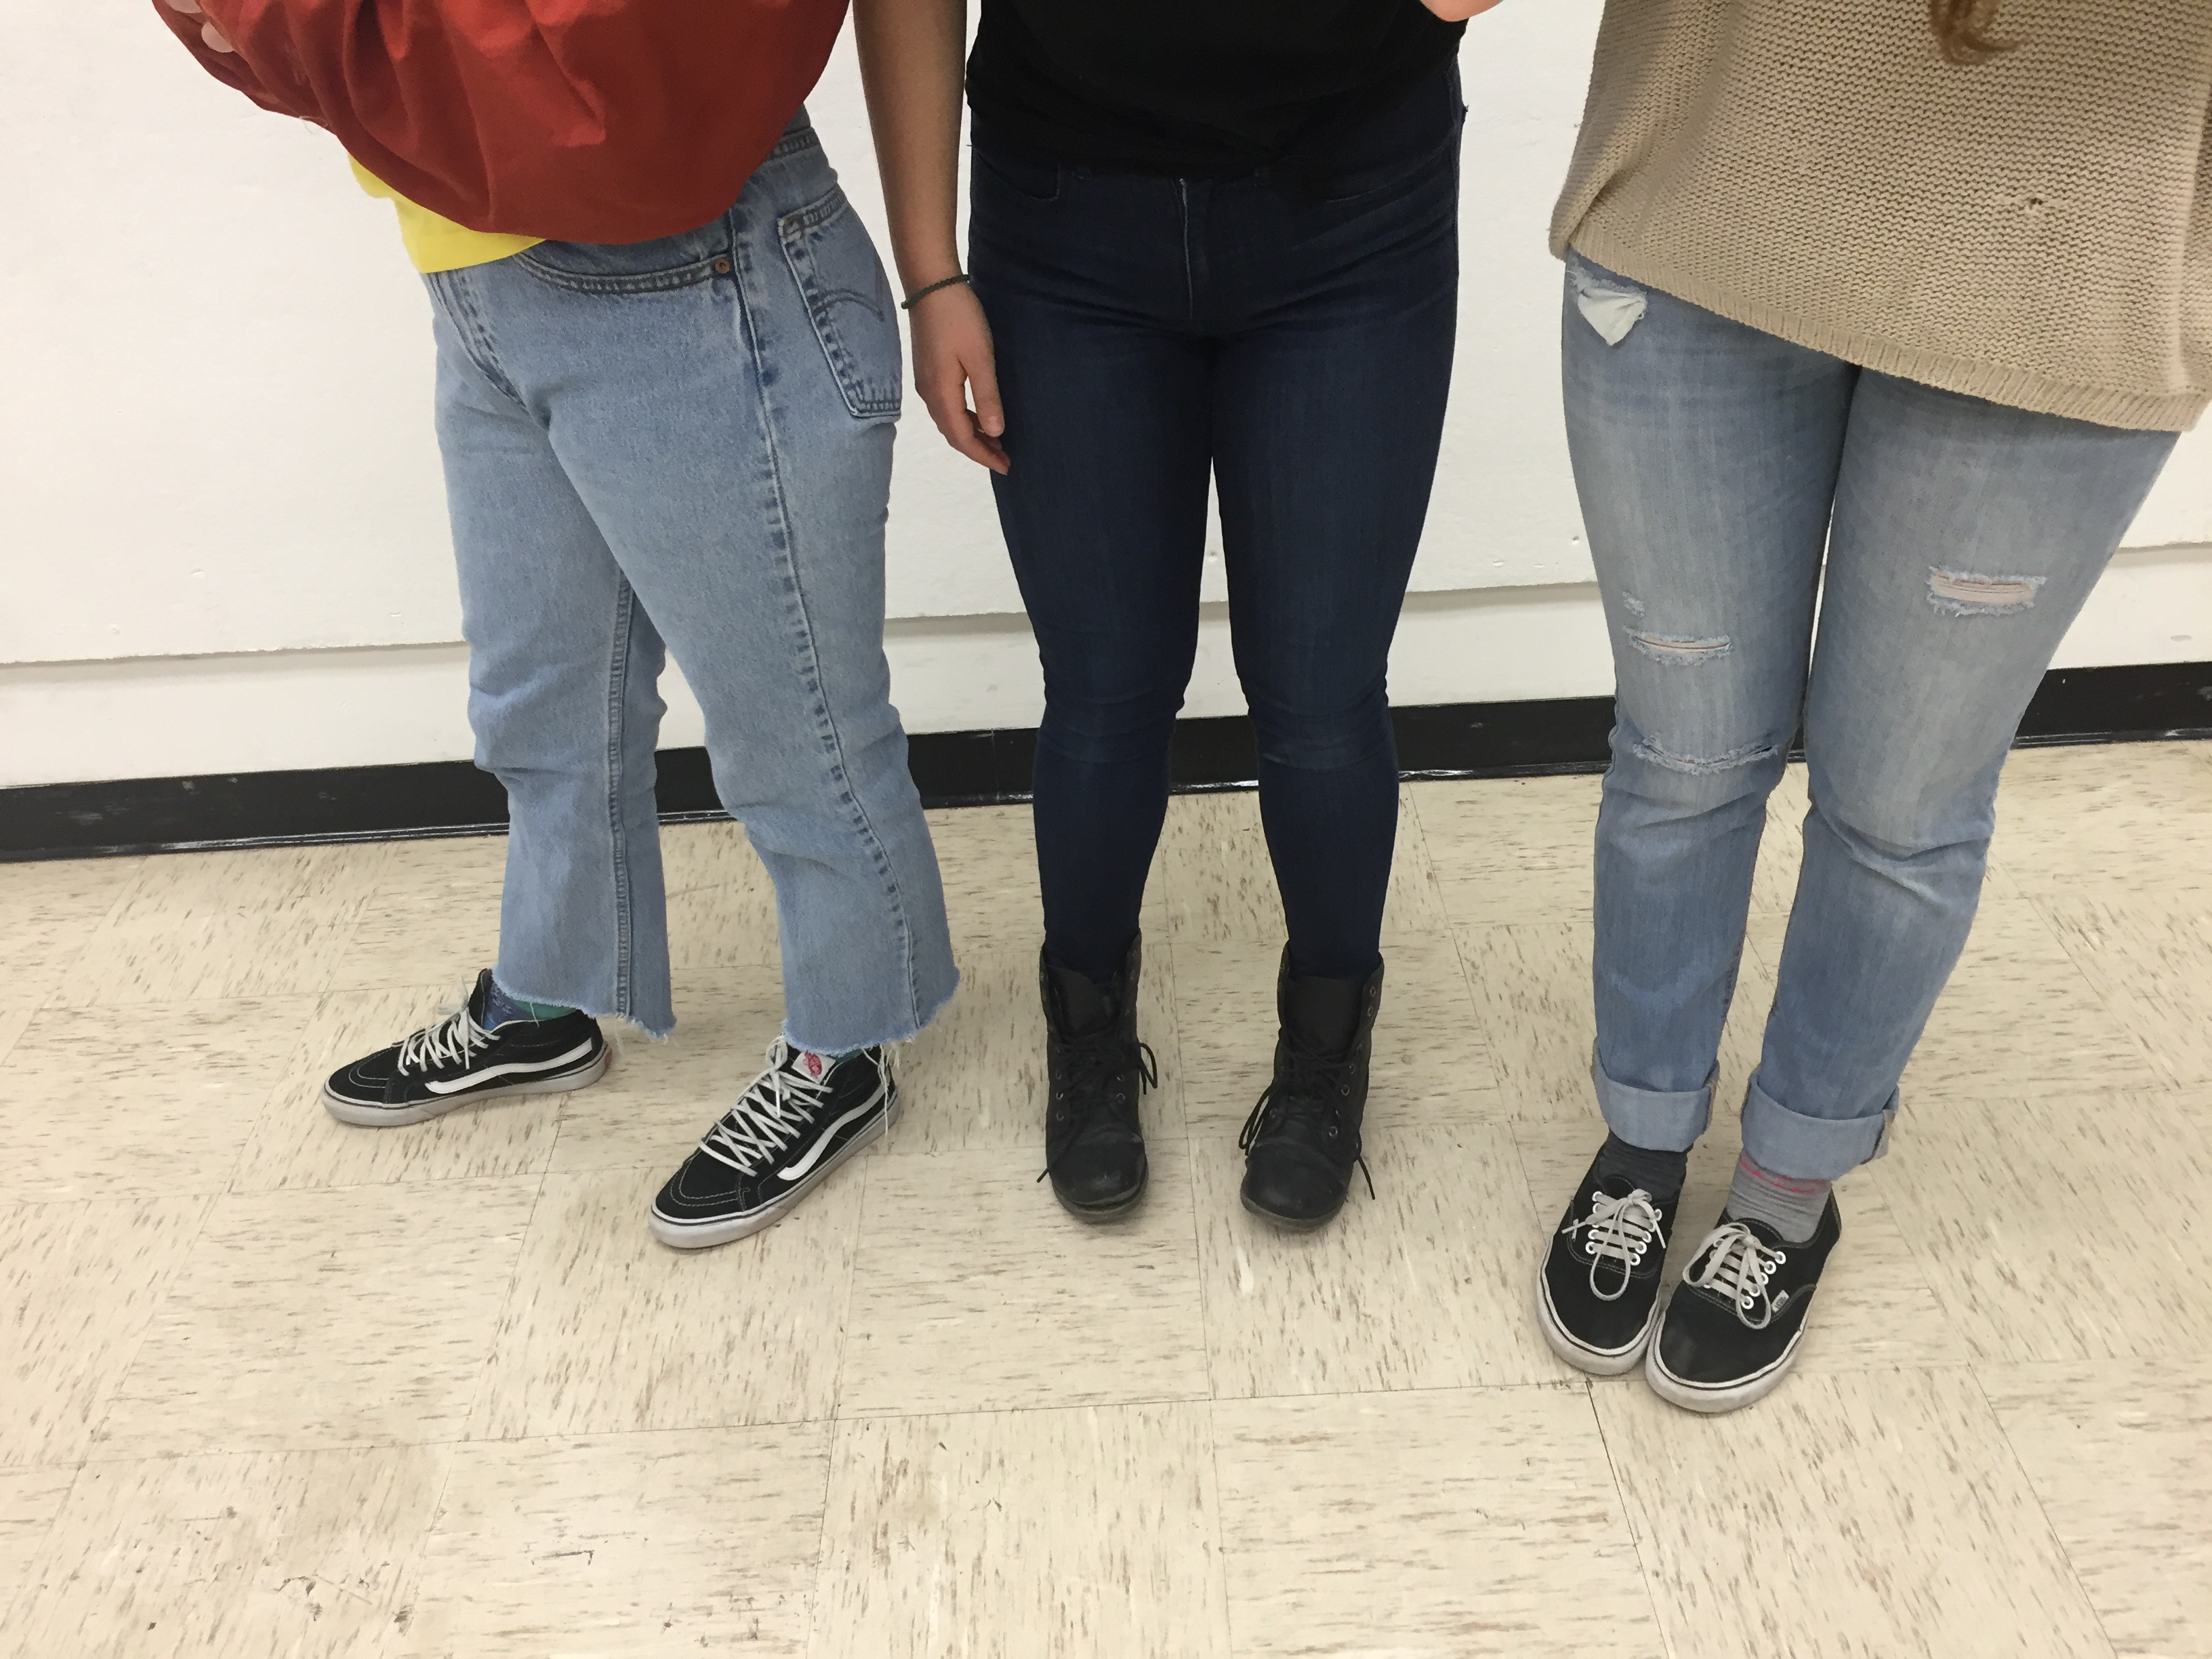 Thrifted mom jeans, various vans, and dark colors 